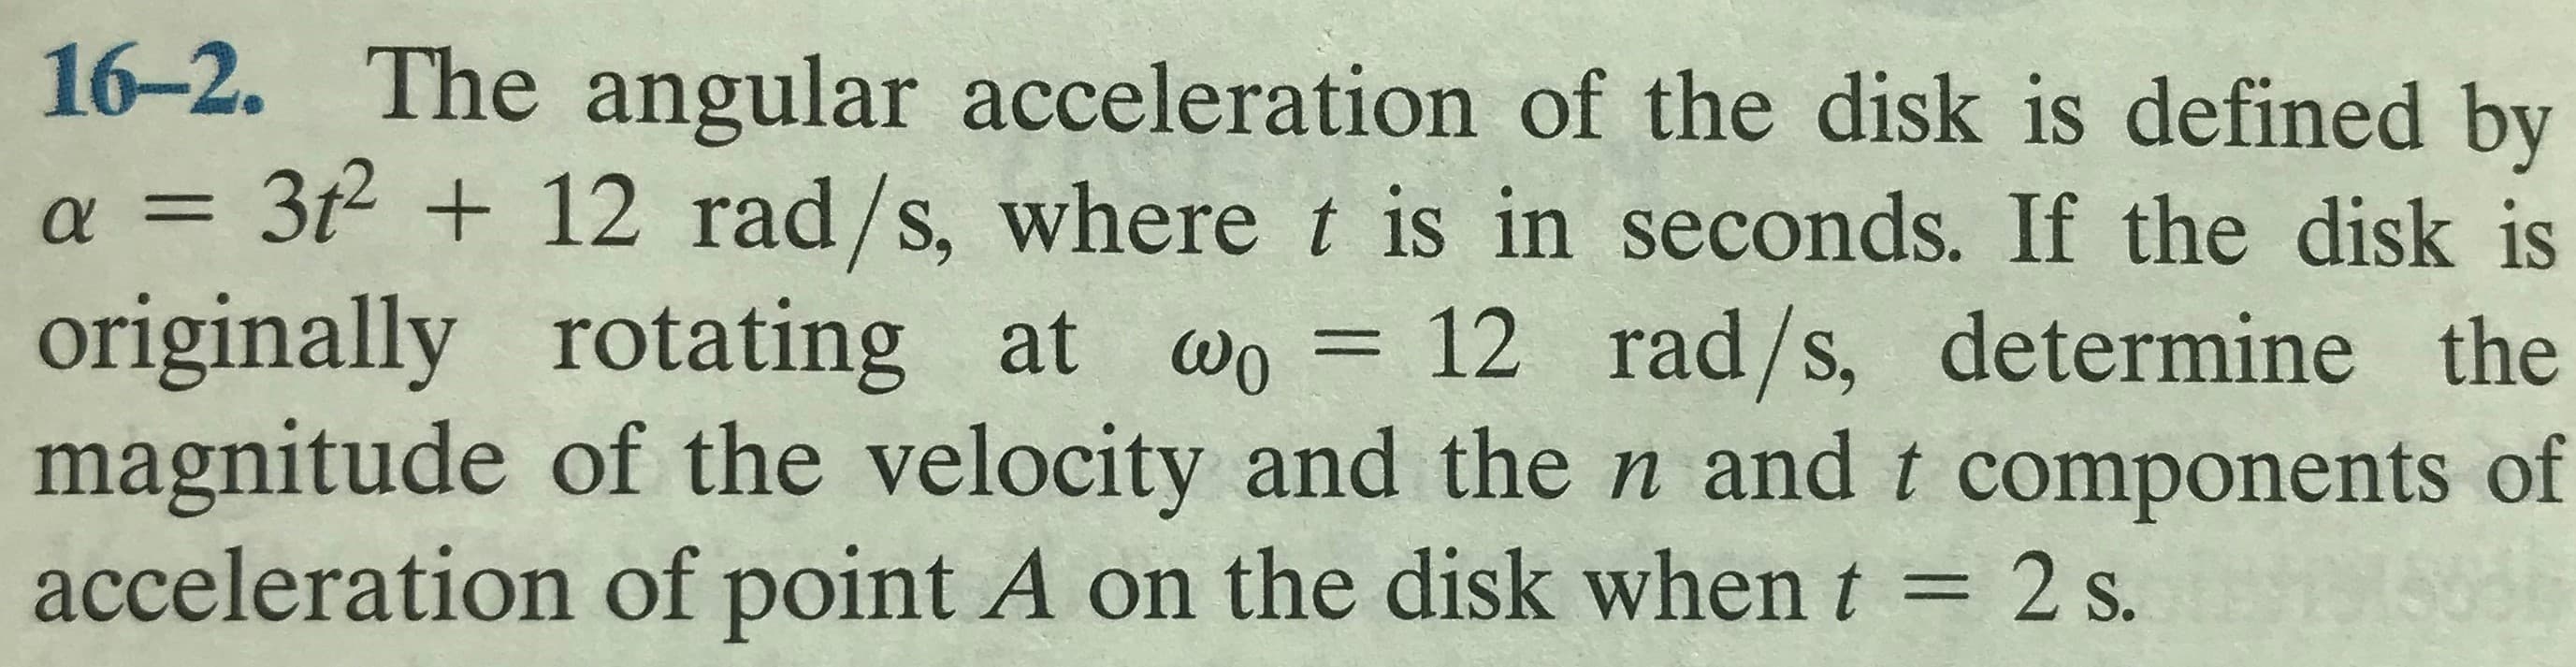 16-2. The angular acceleration of the disk is defined by
3t2 + 12 rad/s, where t is in seconds. If the disk is
originally rotating at wo = 12 rad/s, determine the
magnitude of the velocity and the n and t components of
acceleration of point A on the disk when t = 2 s.
%3D
